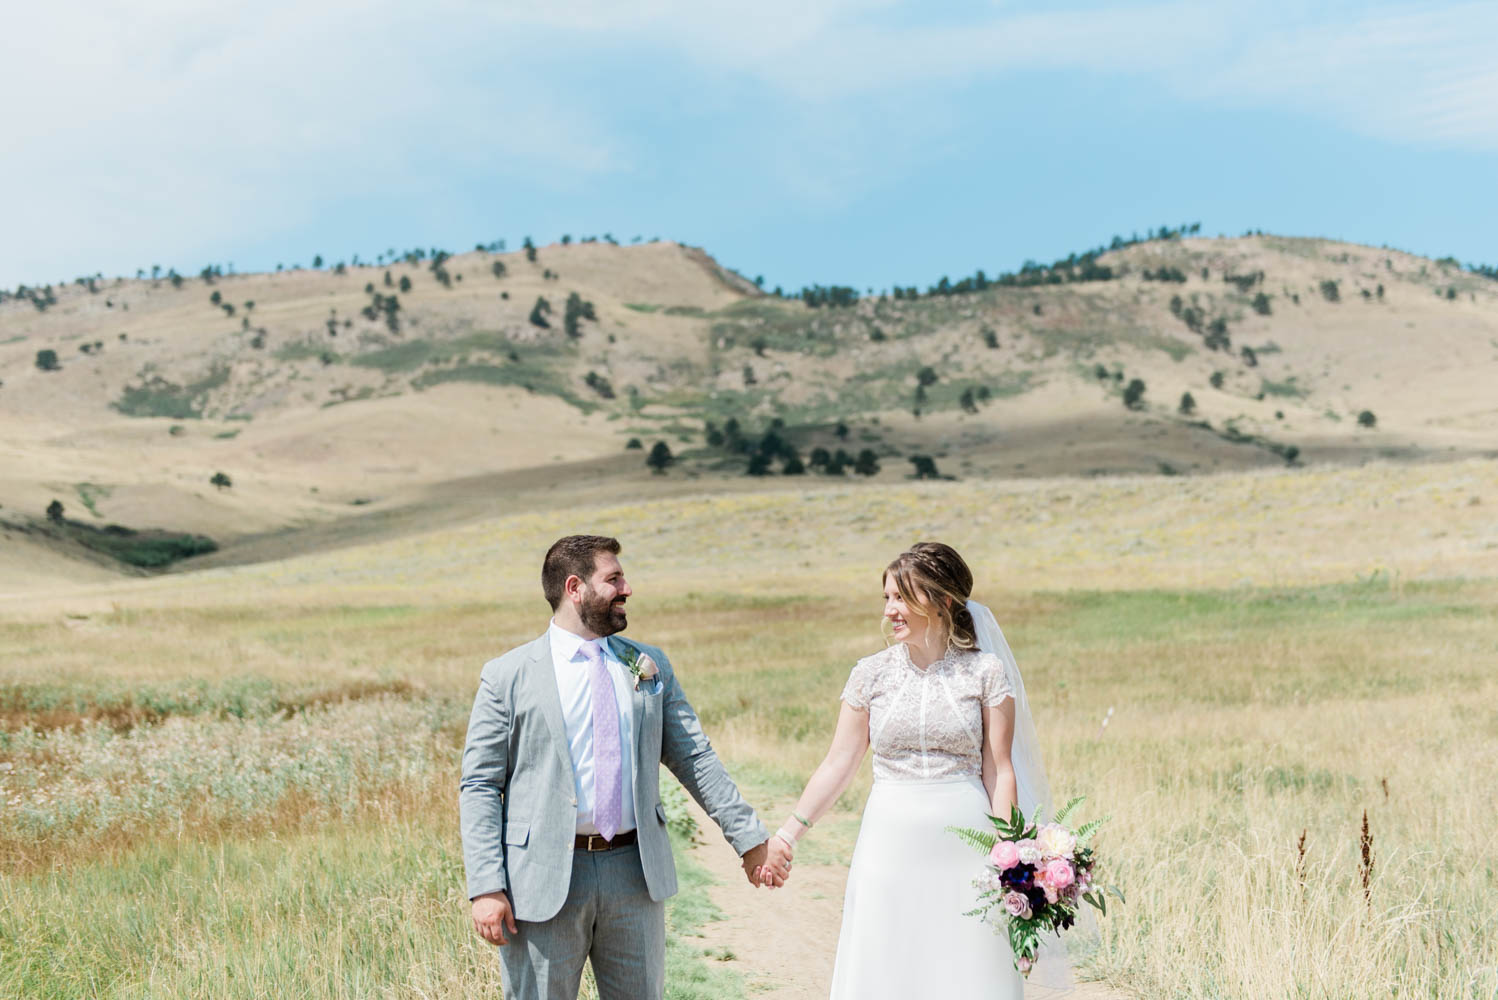 Bride and Groom Photography Portraits in the Boulder Foothills 